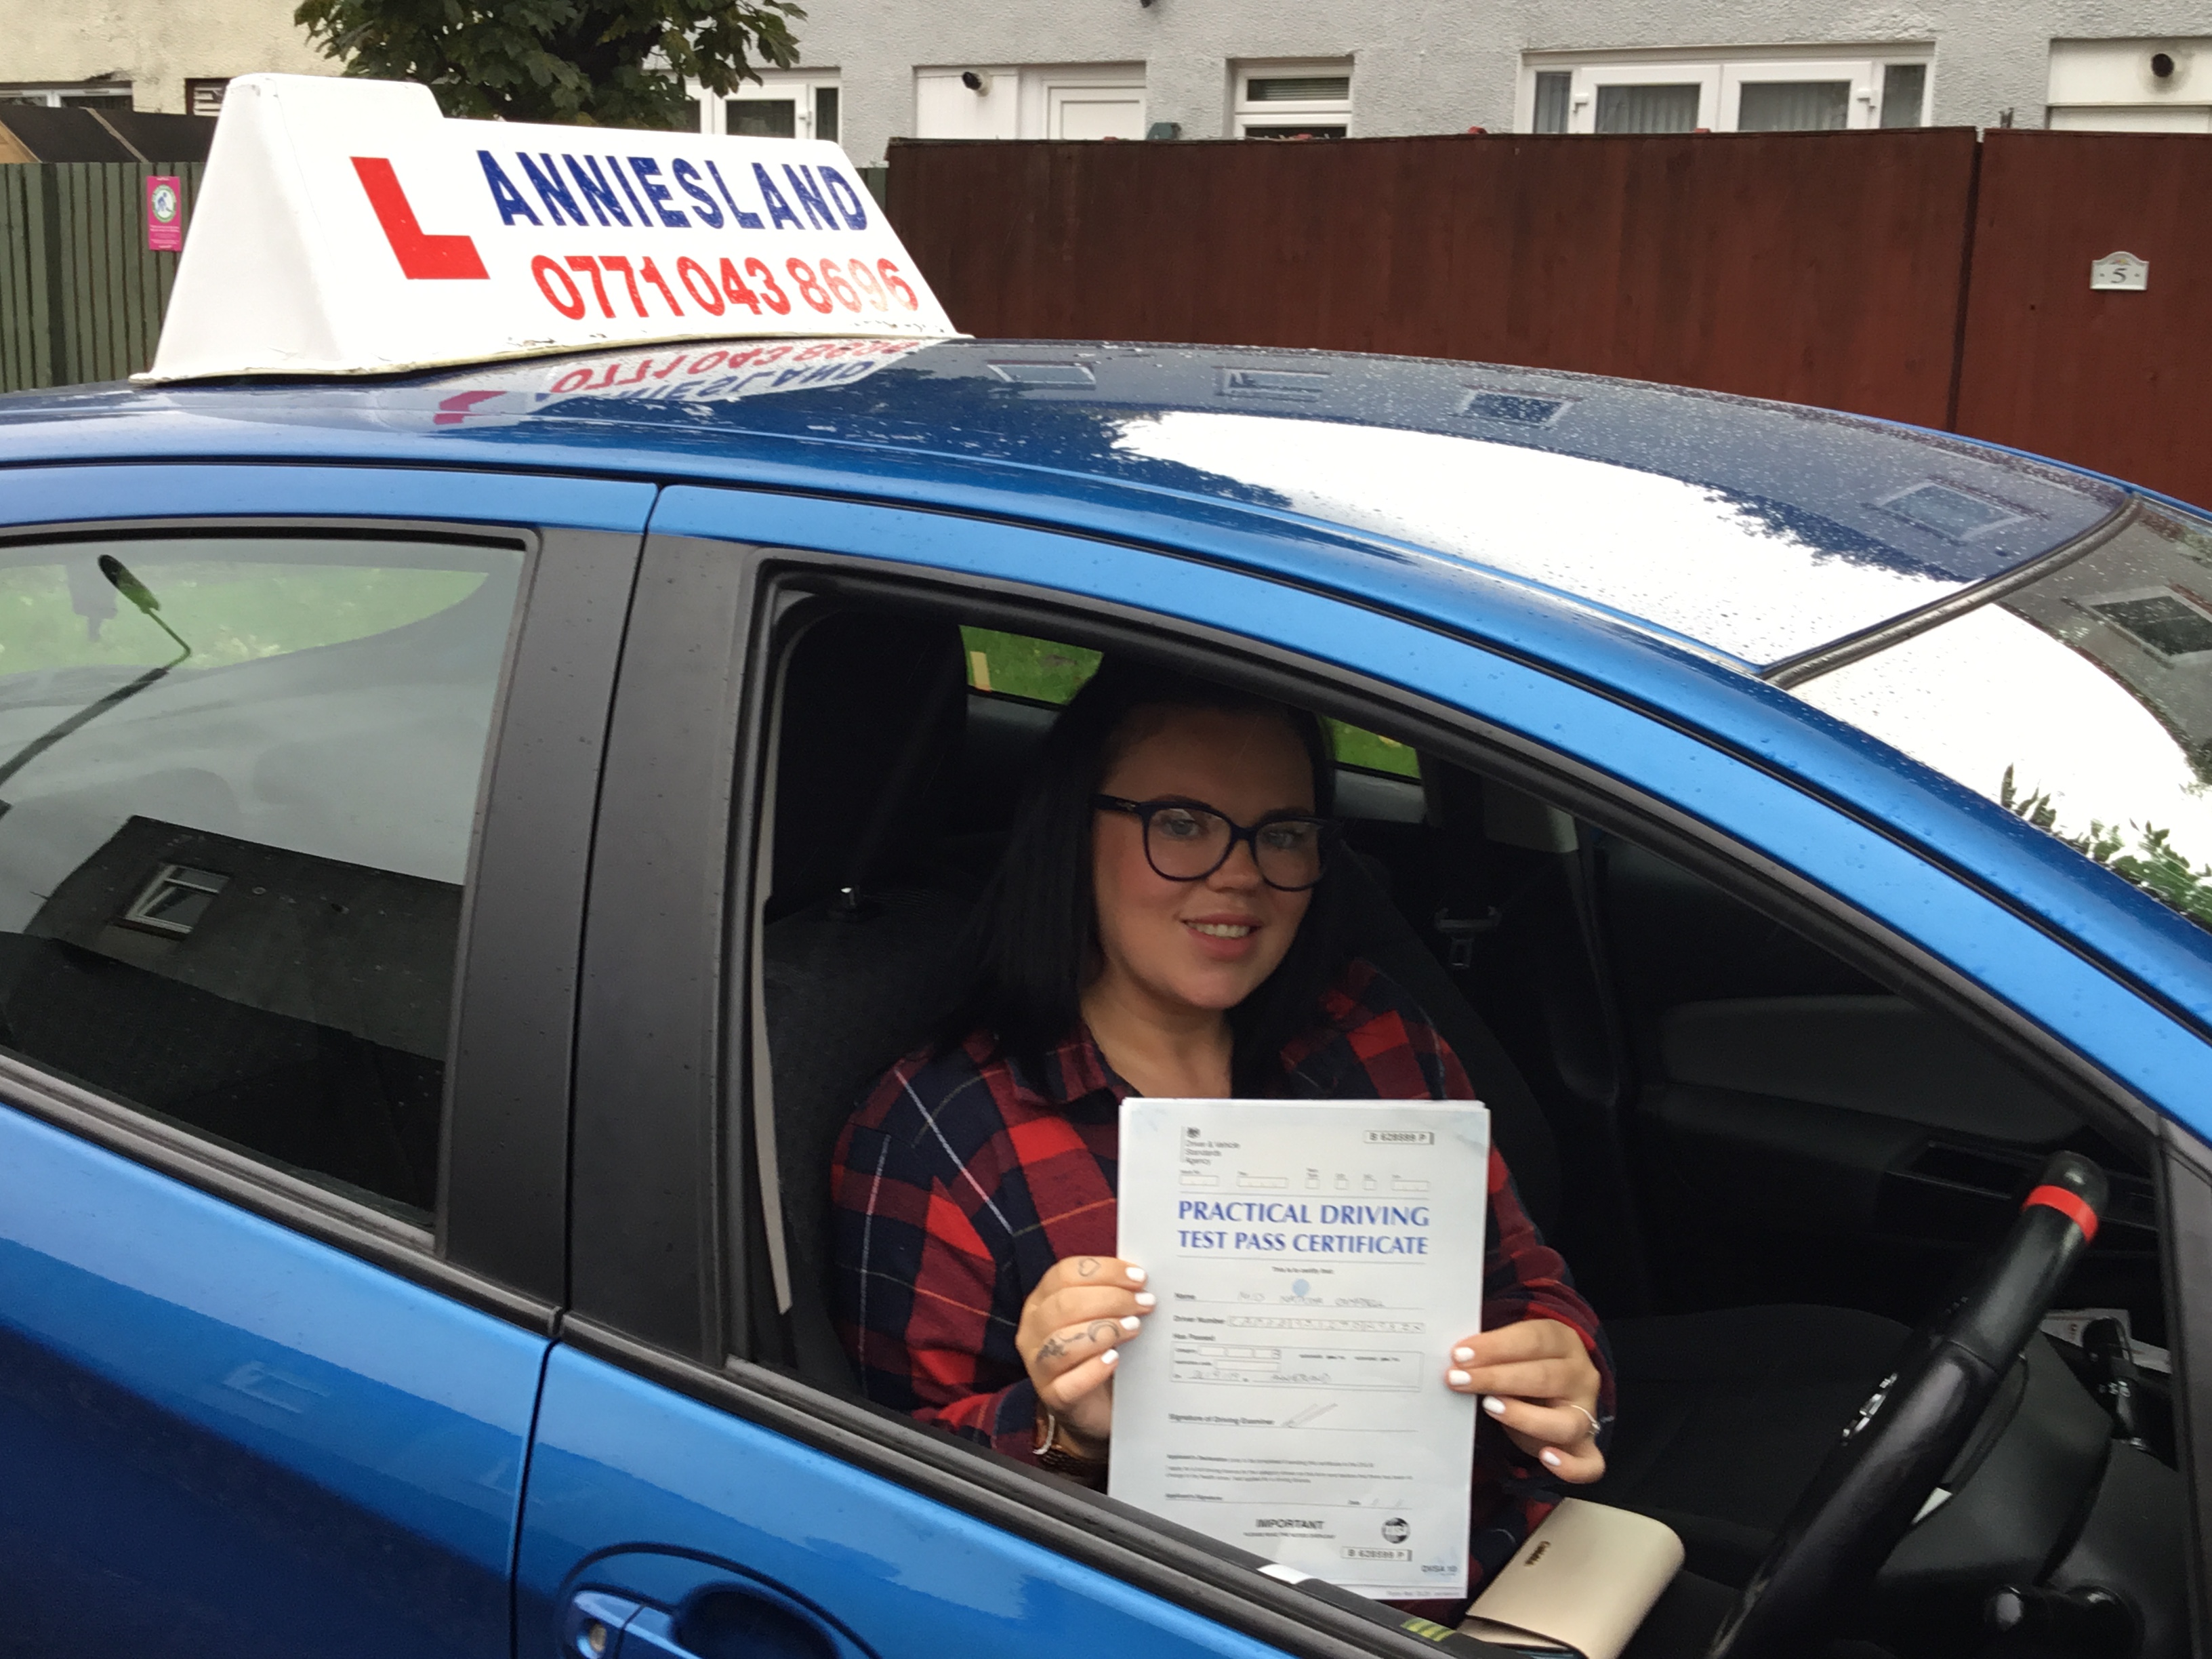 Natasha Campbell successfully passed their driving test with Anniesland Driving School